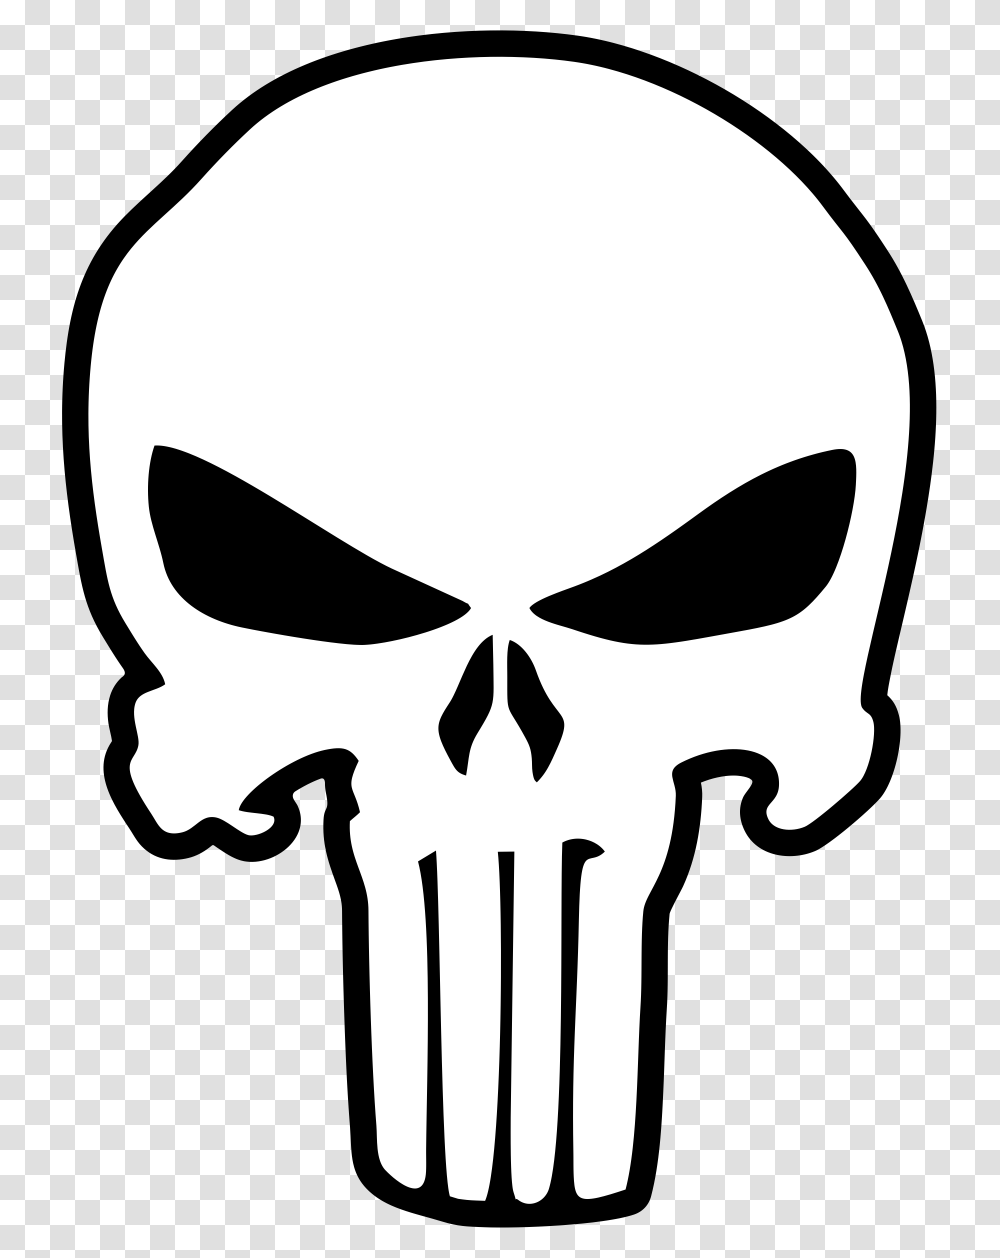 Inch Magnet Dont Tread On Me Punisher Skull, Stencil, Label, Silhouette Transparent Png